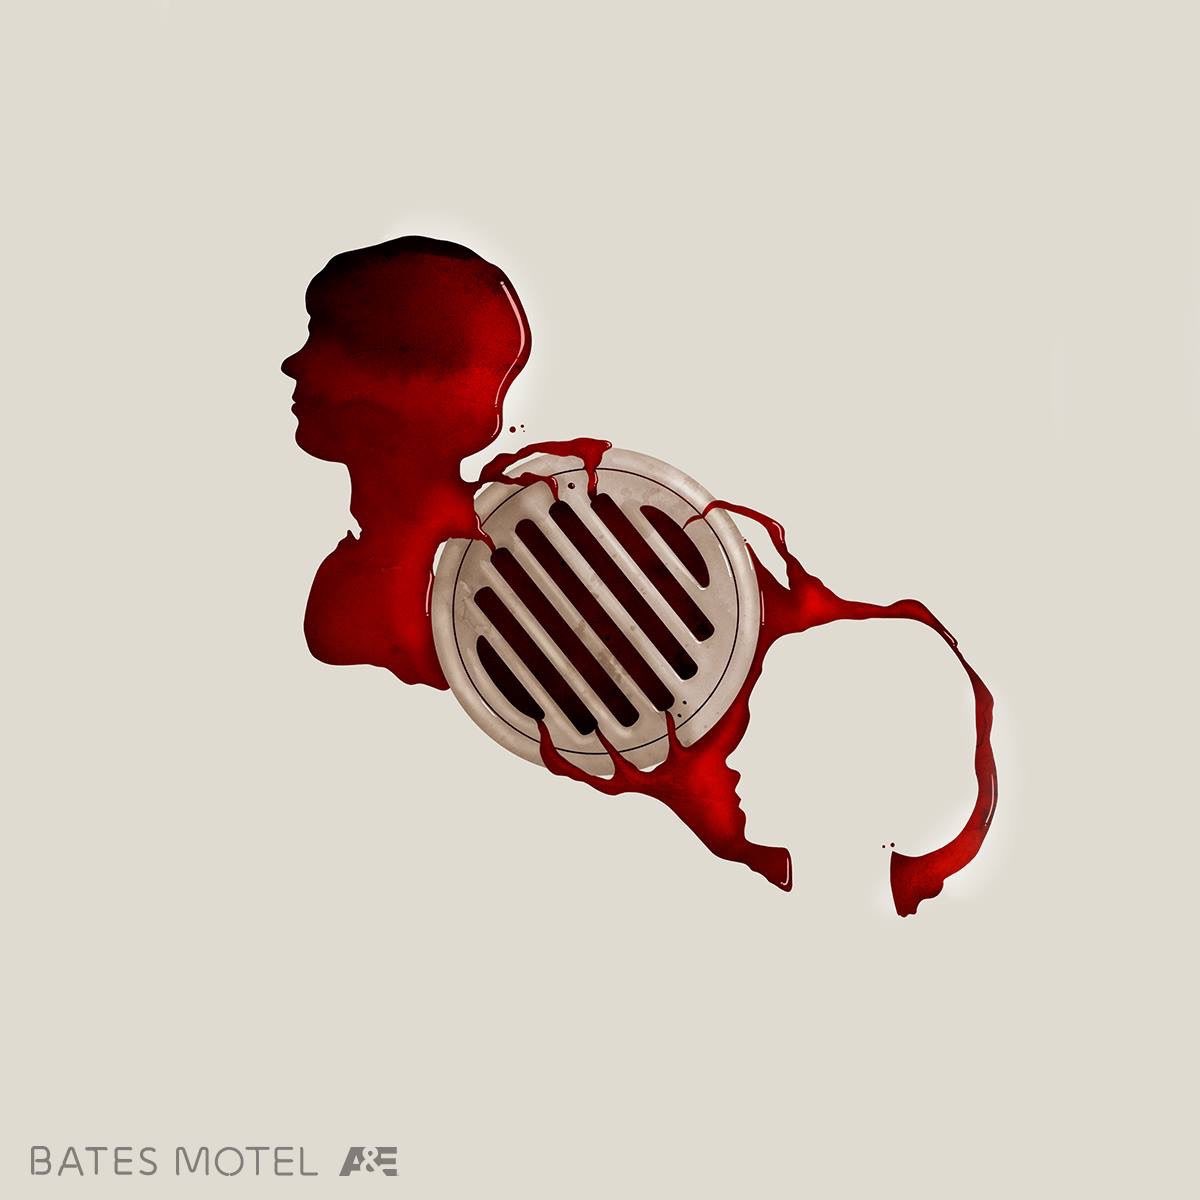 “Blood is thicker than Water.” #BatesMotel